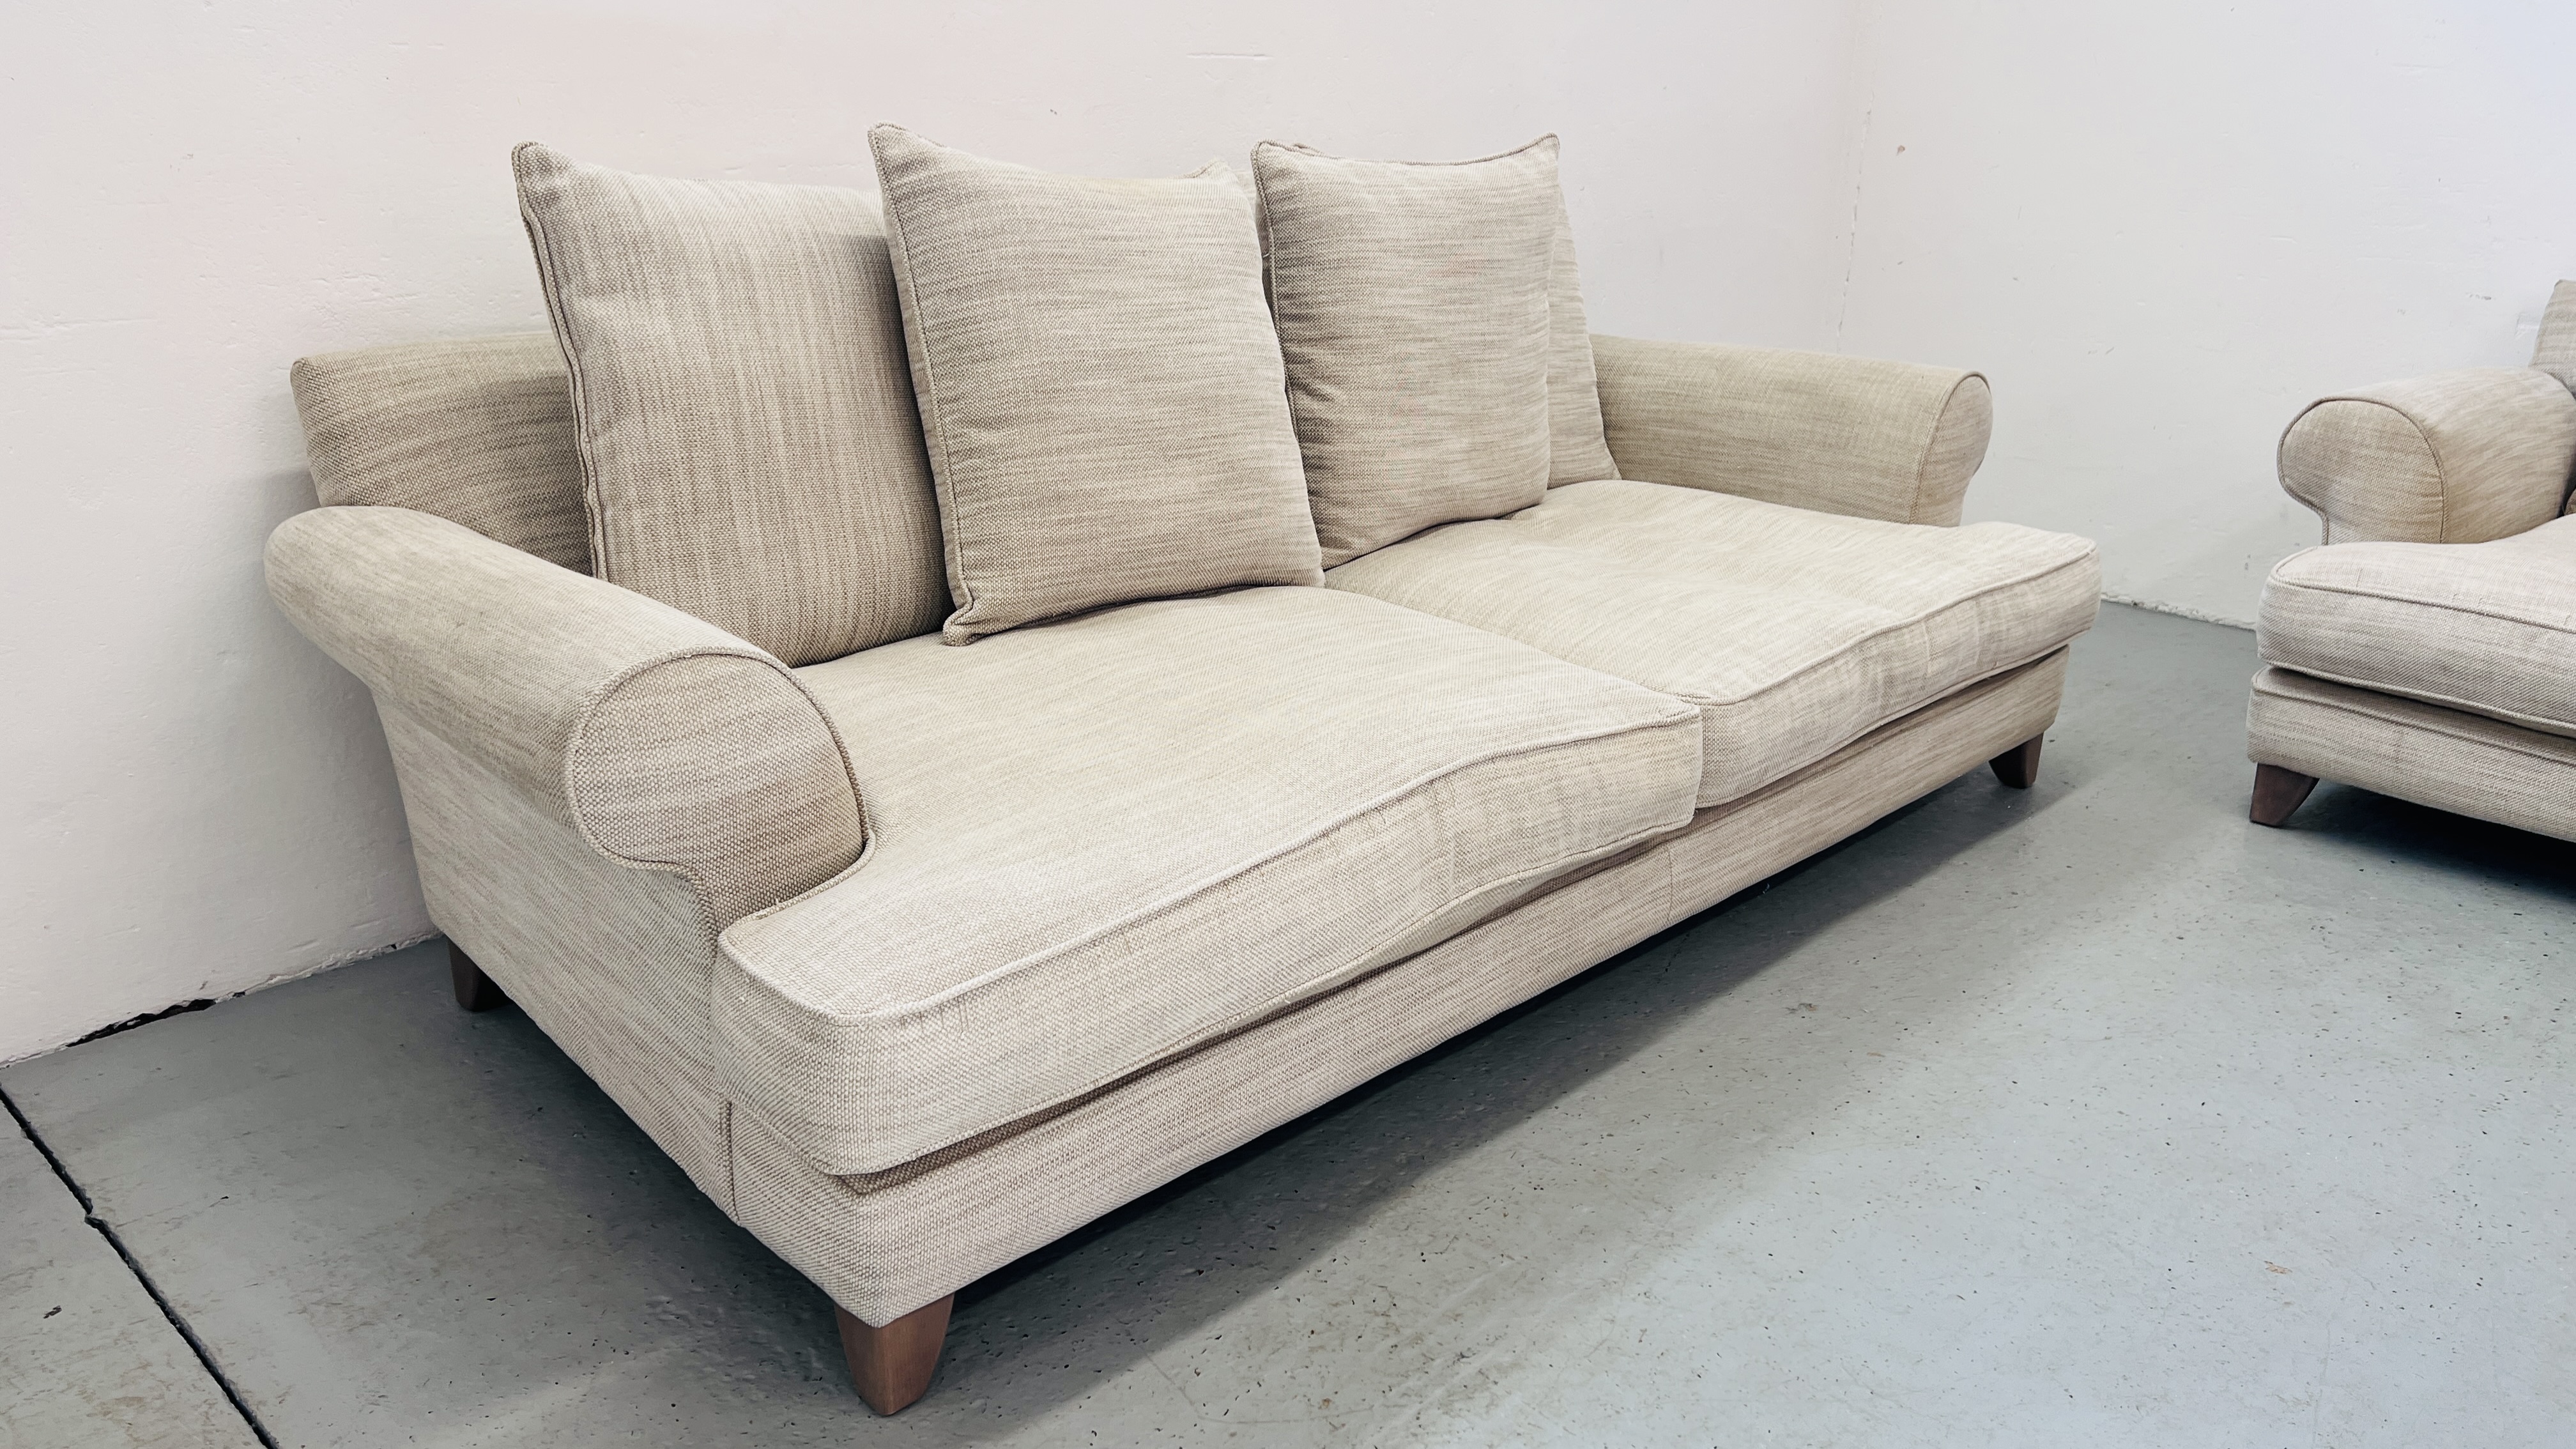 A PAIR OF "THE LOUNGE Co" OATMEAL UPHOLSTERED SOFA'S EACH LENGTH 210CM. - Image 10 of 22